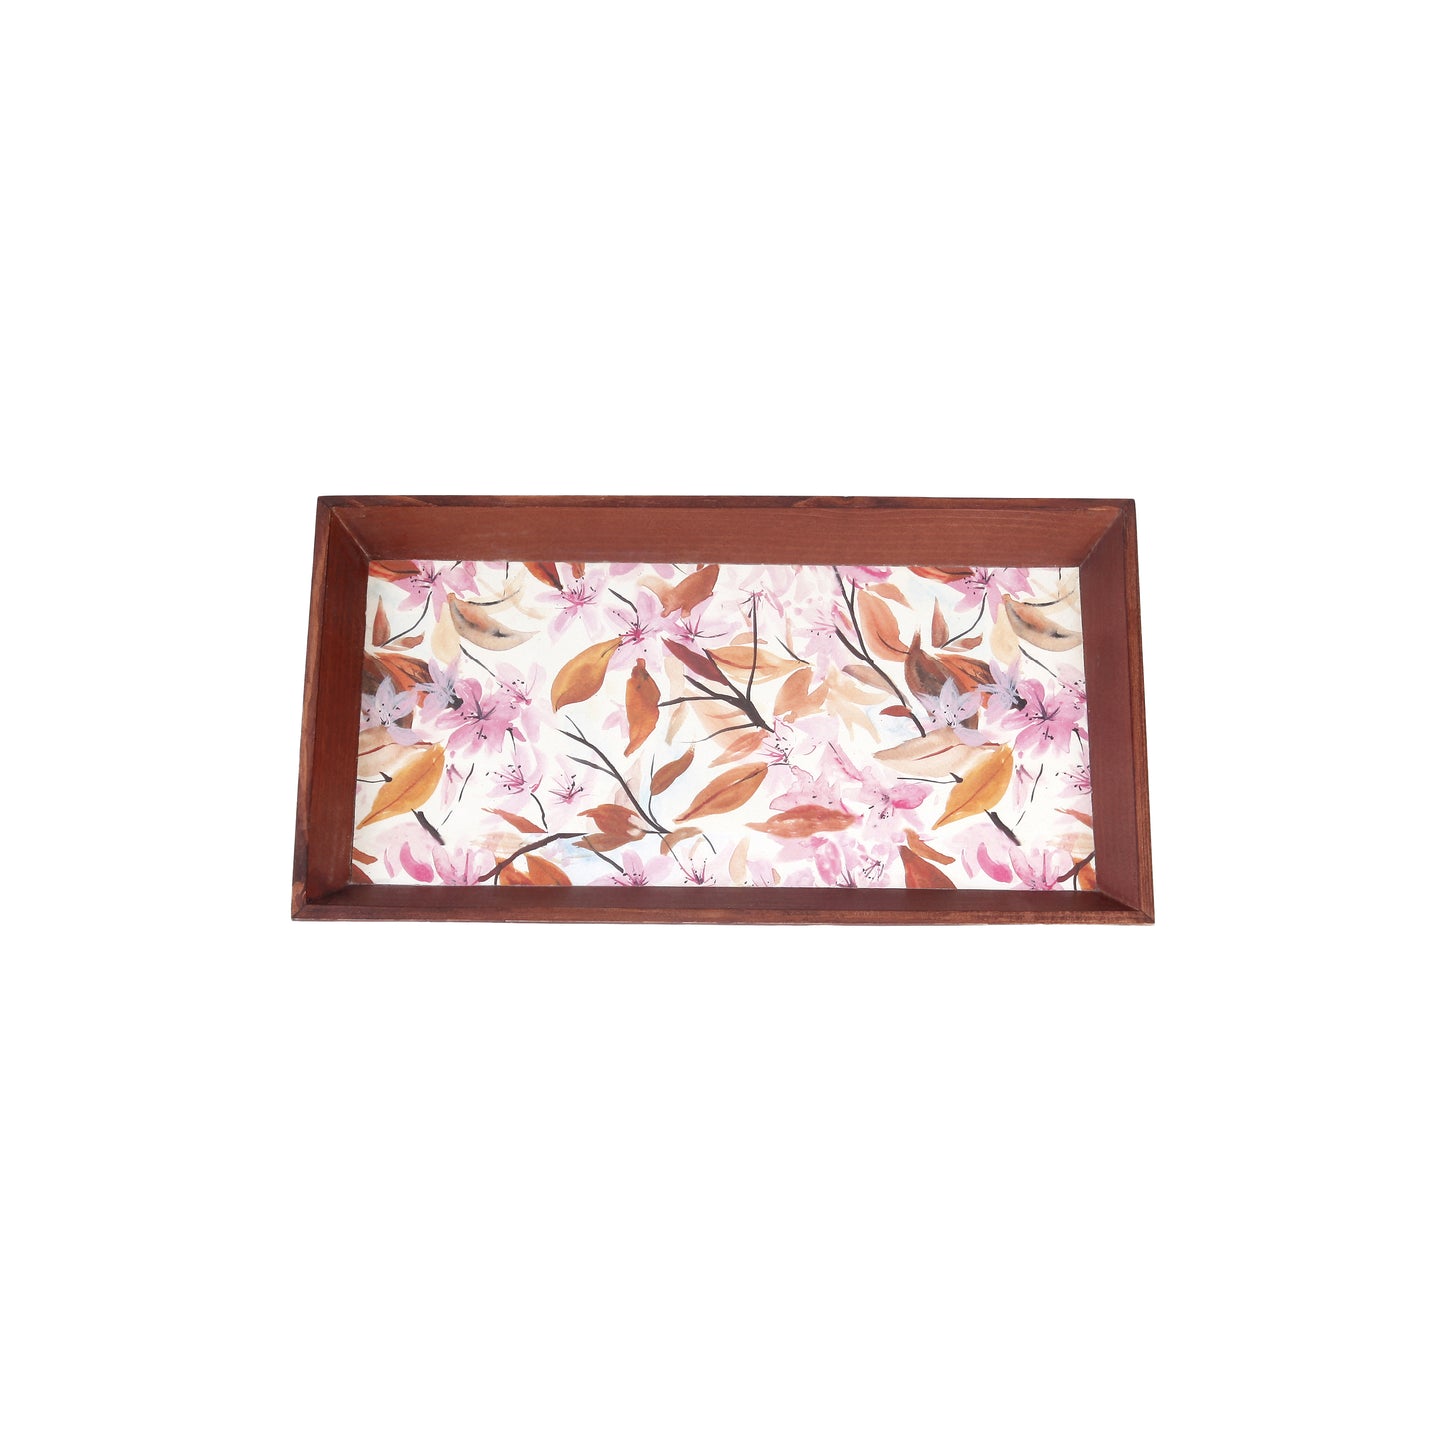 A Tiny Mistake Lily of the Valley Rectangle Wooden Serving Tray, 35 x 20 x 2 cm